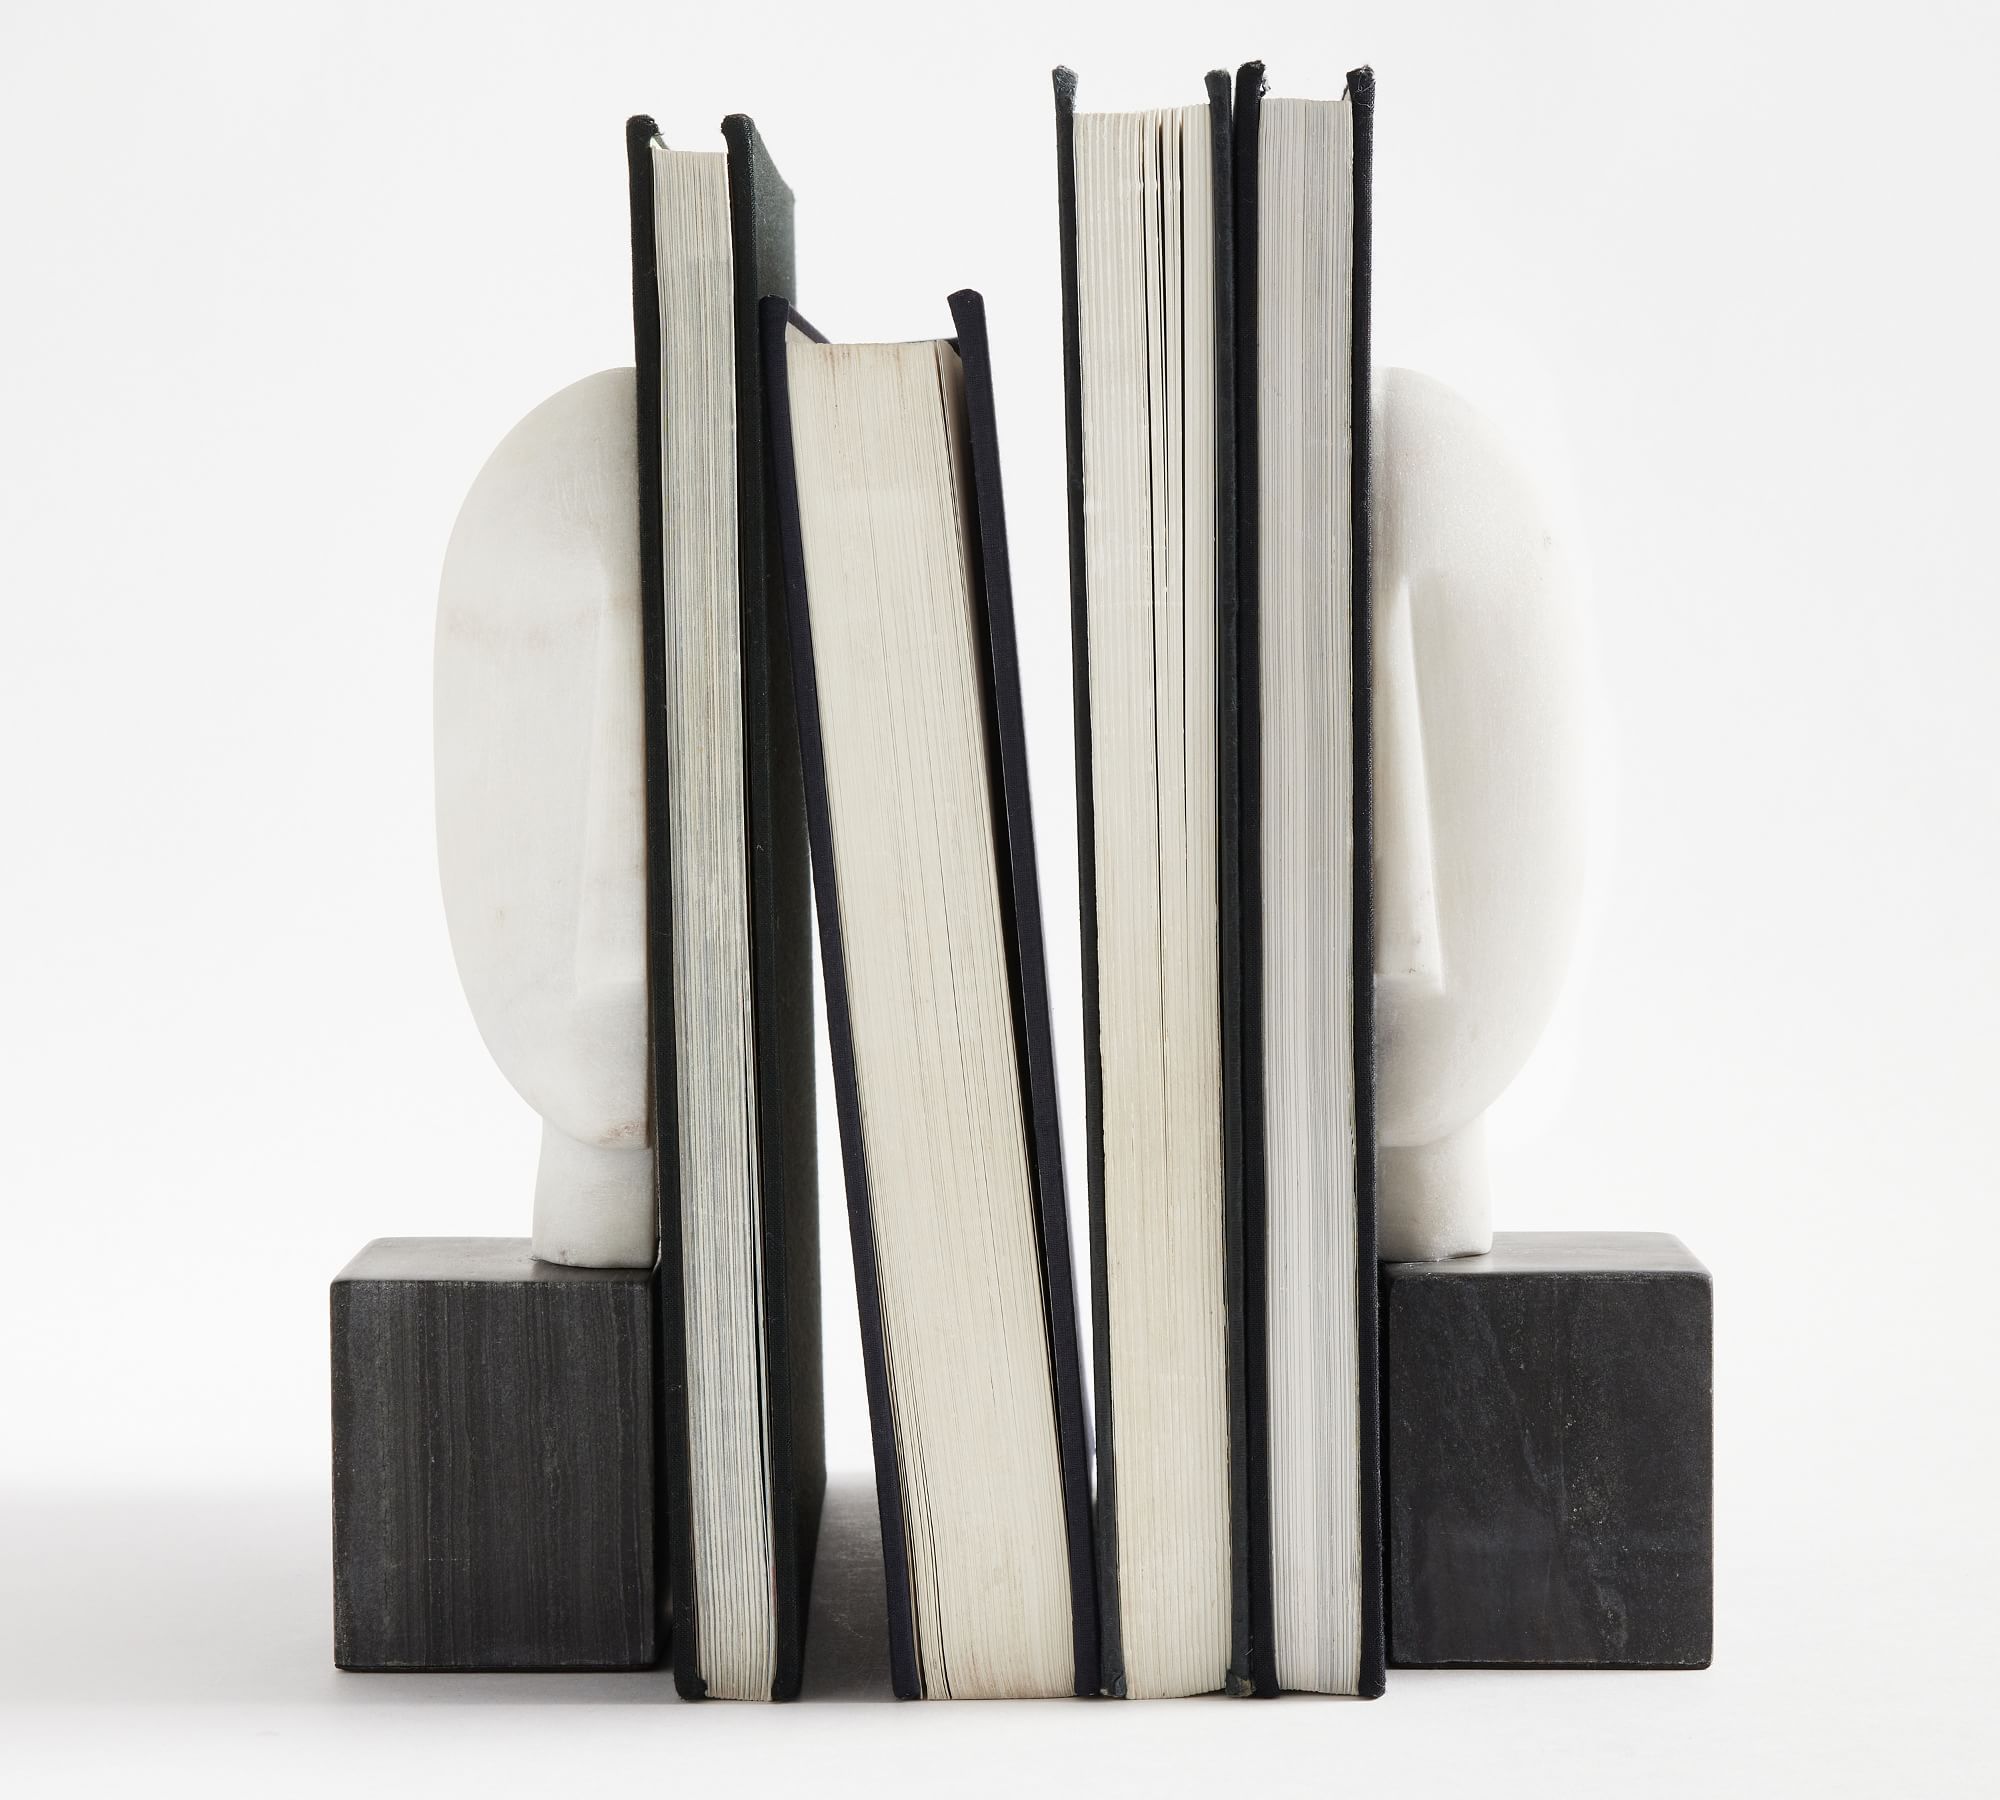 Meditative Handcrafted Bookends